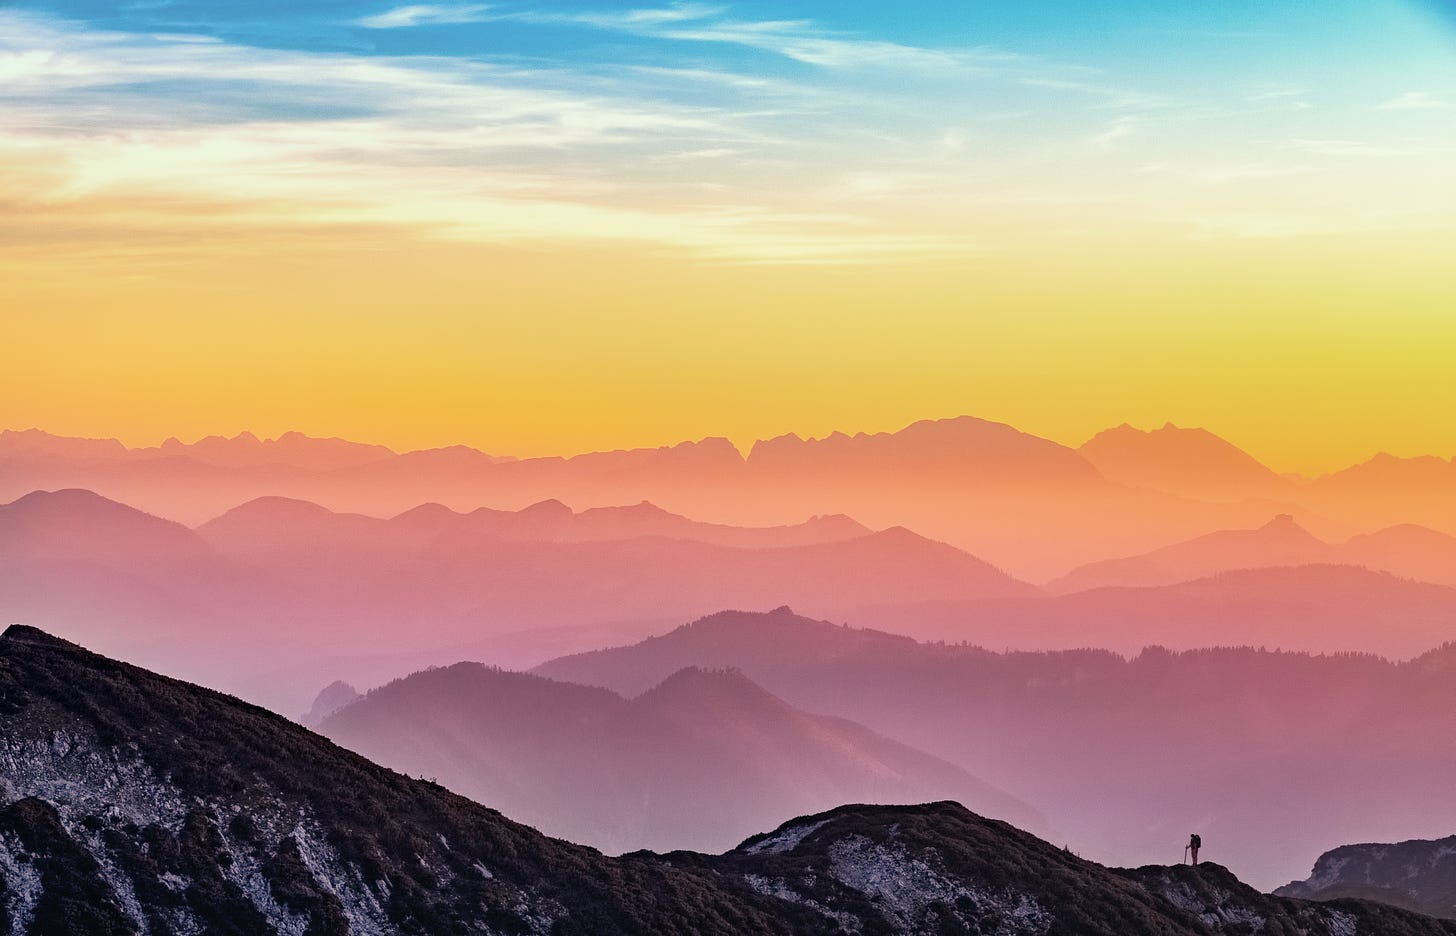 A photo of the sun setting over mountains. By Simon Berger from Unsplash.